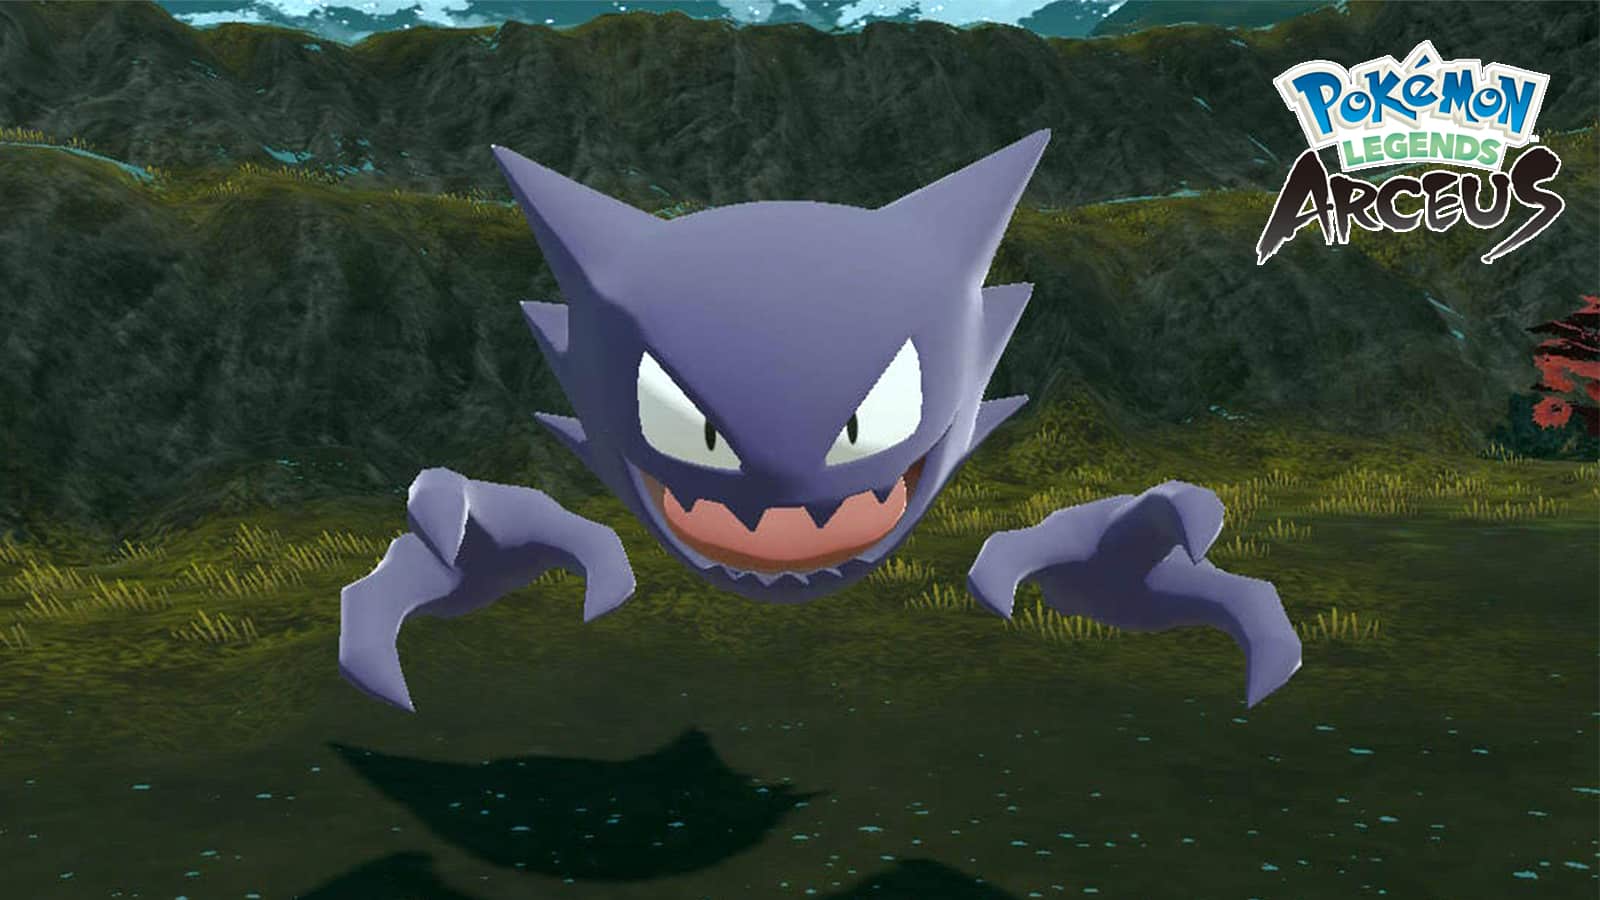 Haunter about to evolve into Gengar in Pokemon Legends Arceus